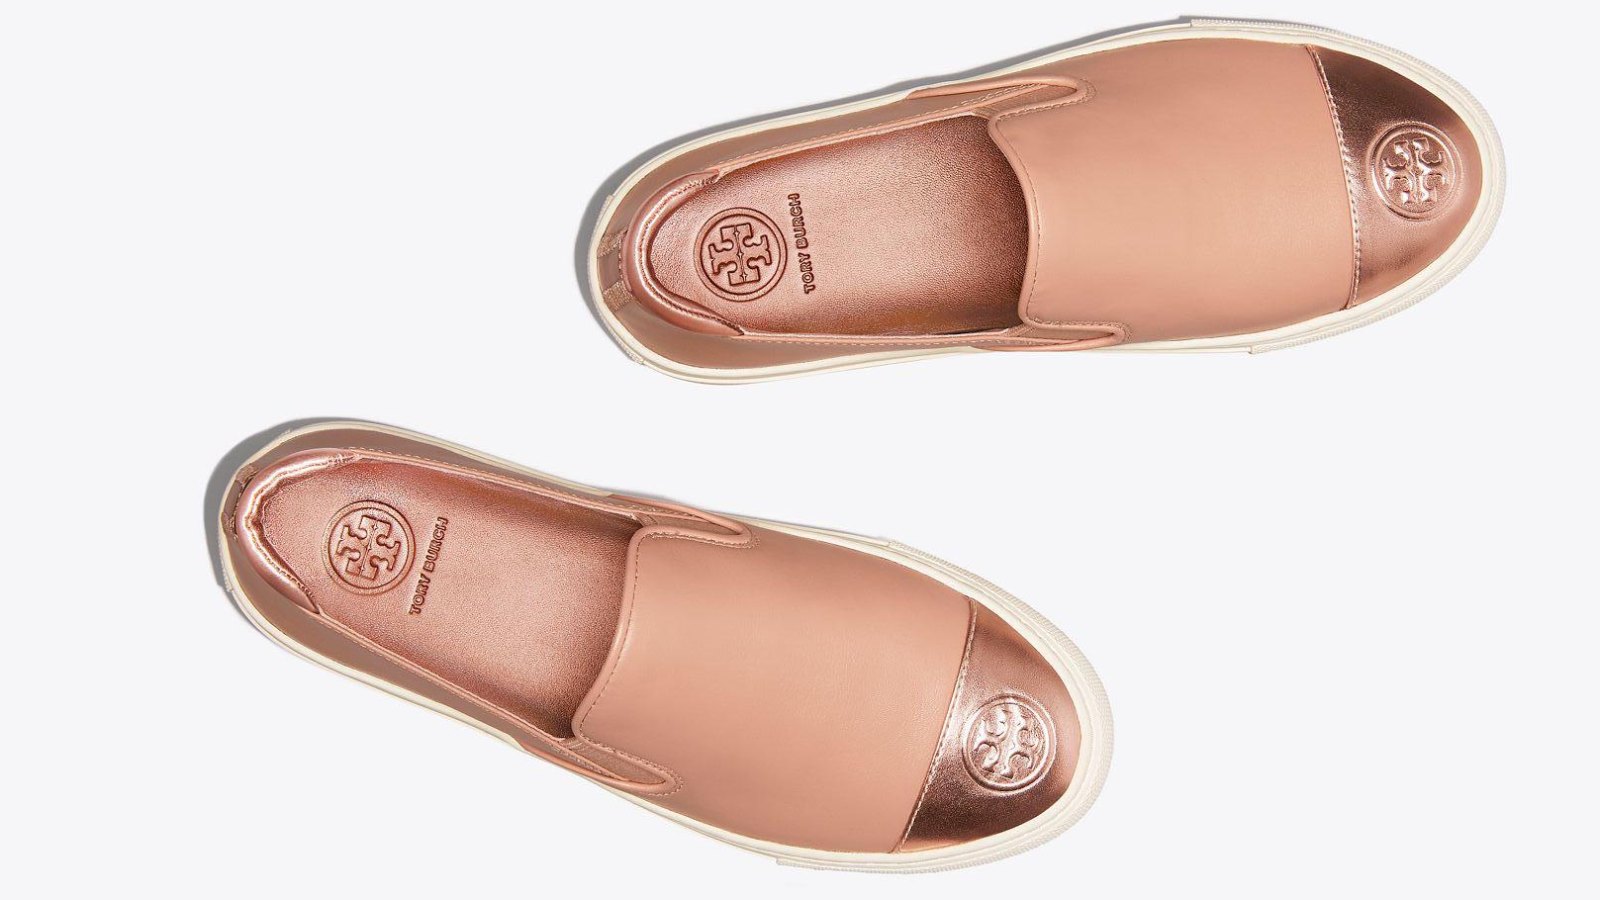 Tory Burch Sneakers Are on Major Sale at Nordstrom